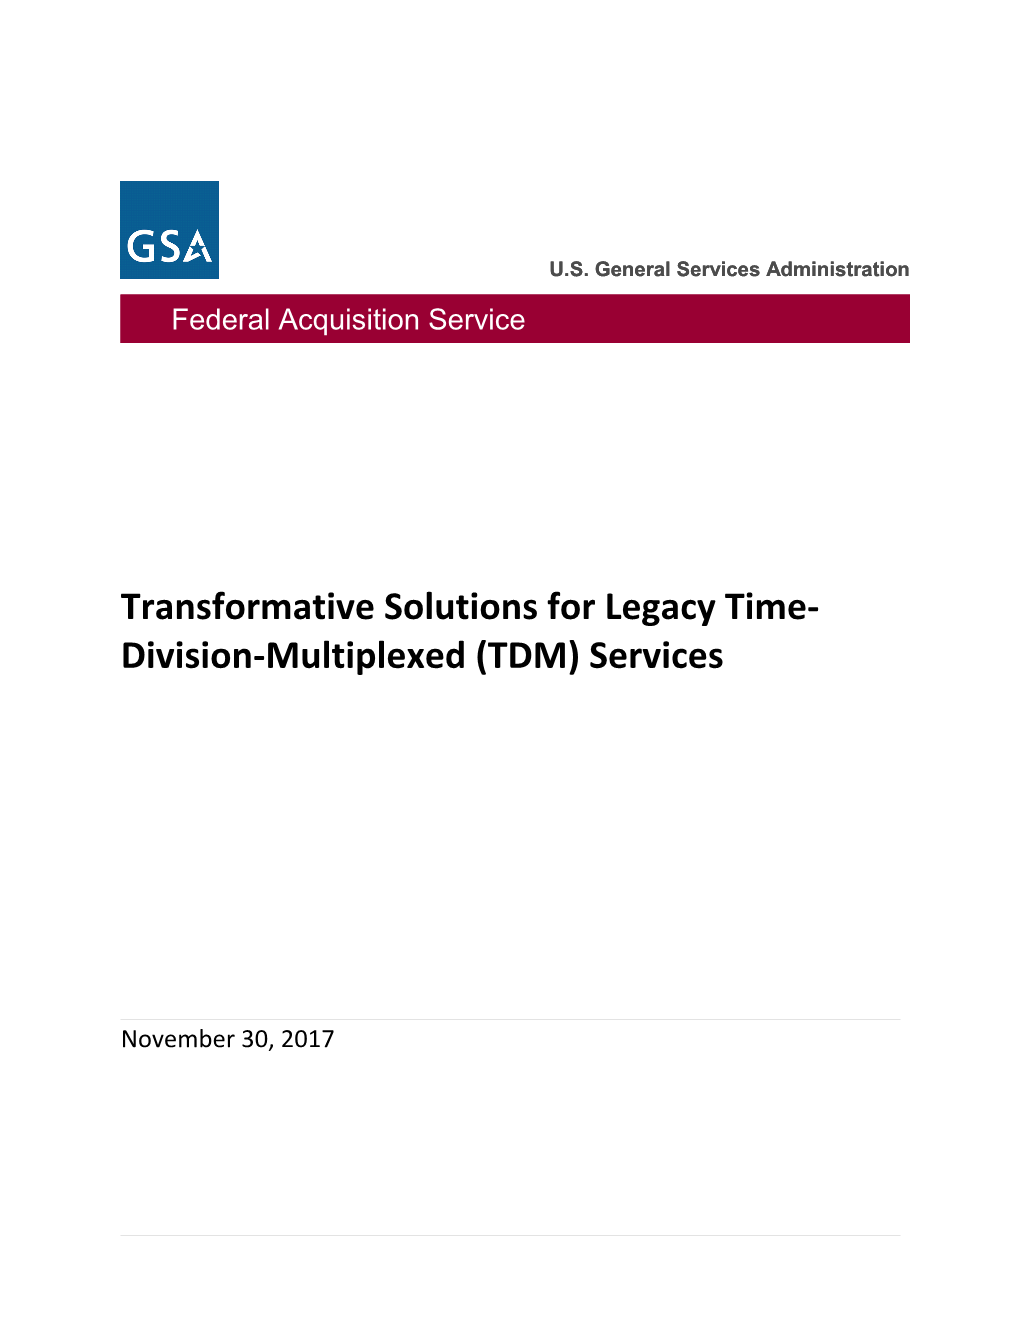 Transformative Solutions for Legacy Time-Division-Multiplexed (TDM) Services